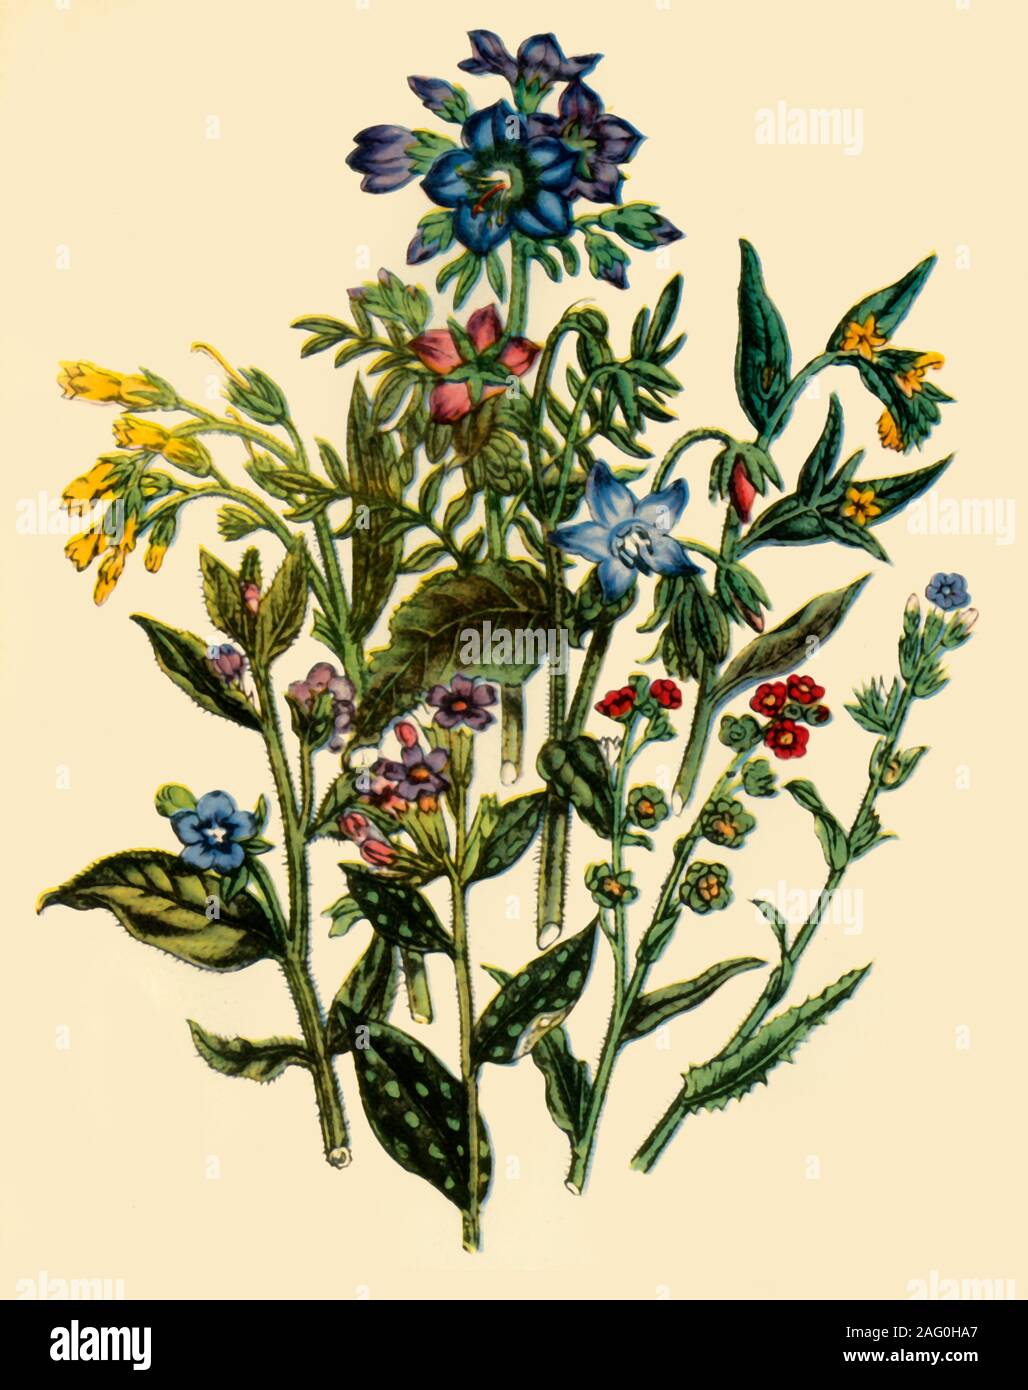 'Group from the Forget-Me-Not Family', 1846, (1944). 'Evergreen Alkanet, Tuberous-Rooted Comfrey, Lungwort, Jacob's Ladder, Borage, Gromwell, Houndstongue, Bugloss'. Botanical illustration from &quot;British Wild Flowers&quot; by Jane Wells Loudon. Published in &quot;Wild Flowers in Britain&quot;, by Geoffrey Grigson. [Collins, London, 1944] Stock Photo